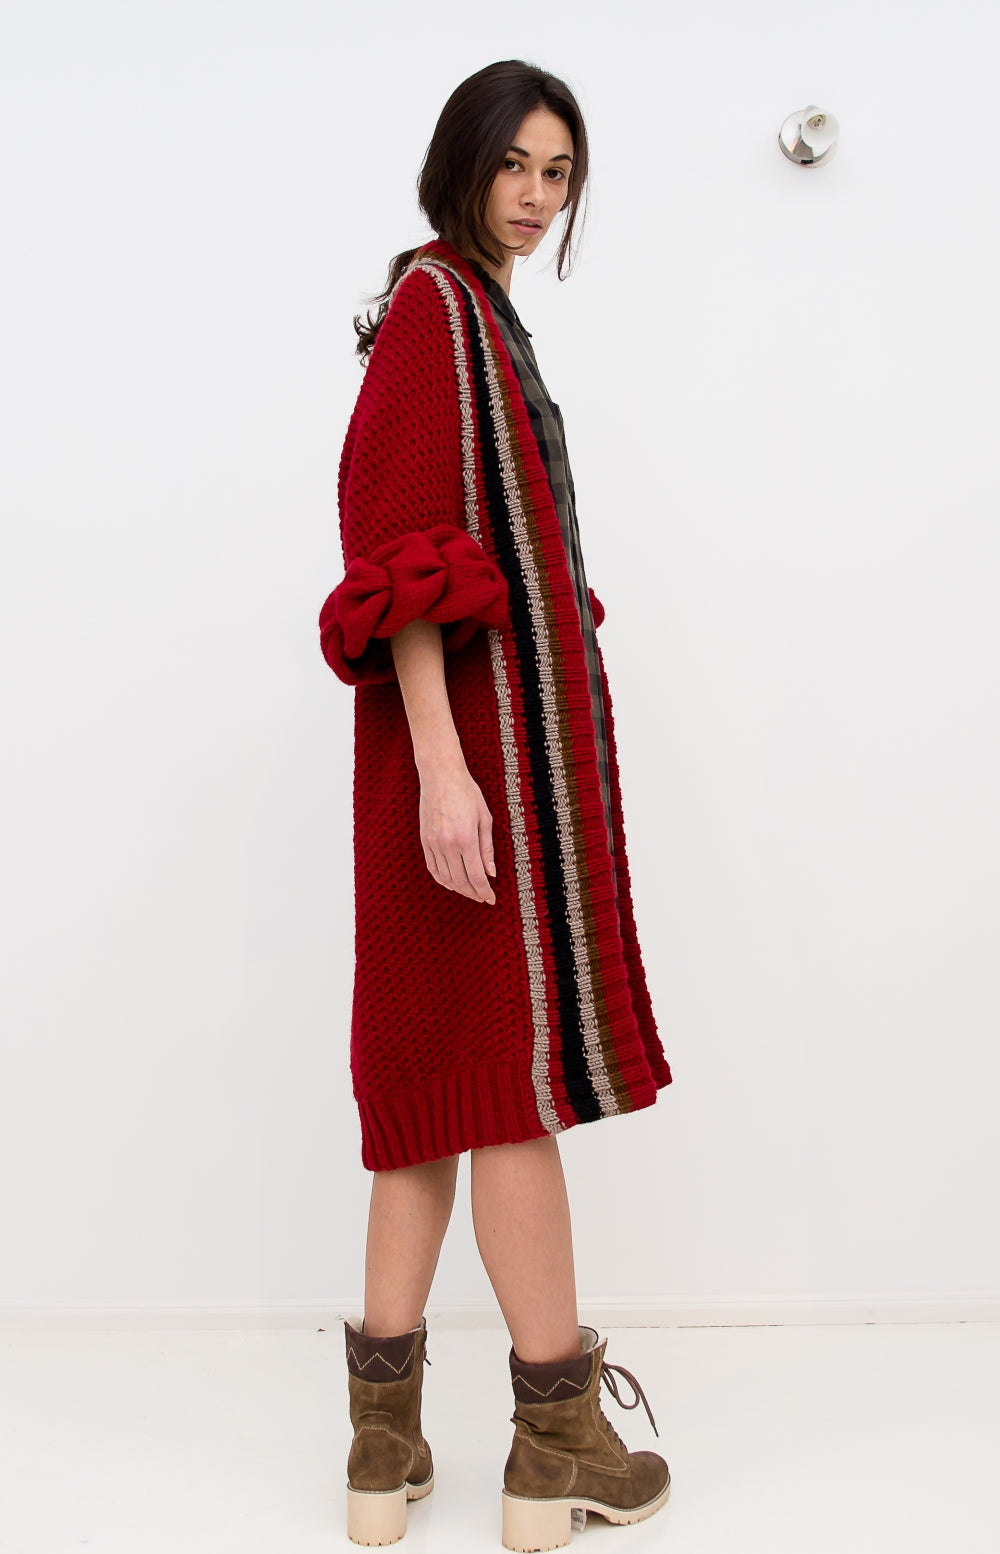 Knitted red cardigan by Loom